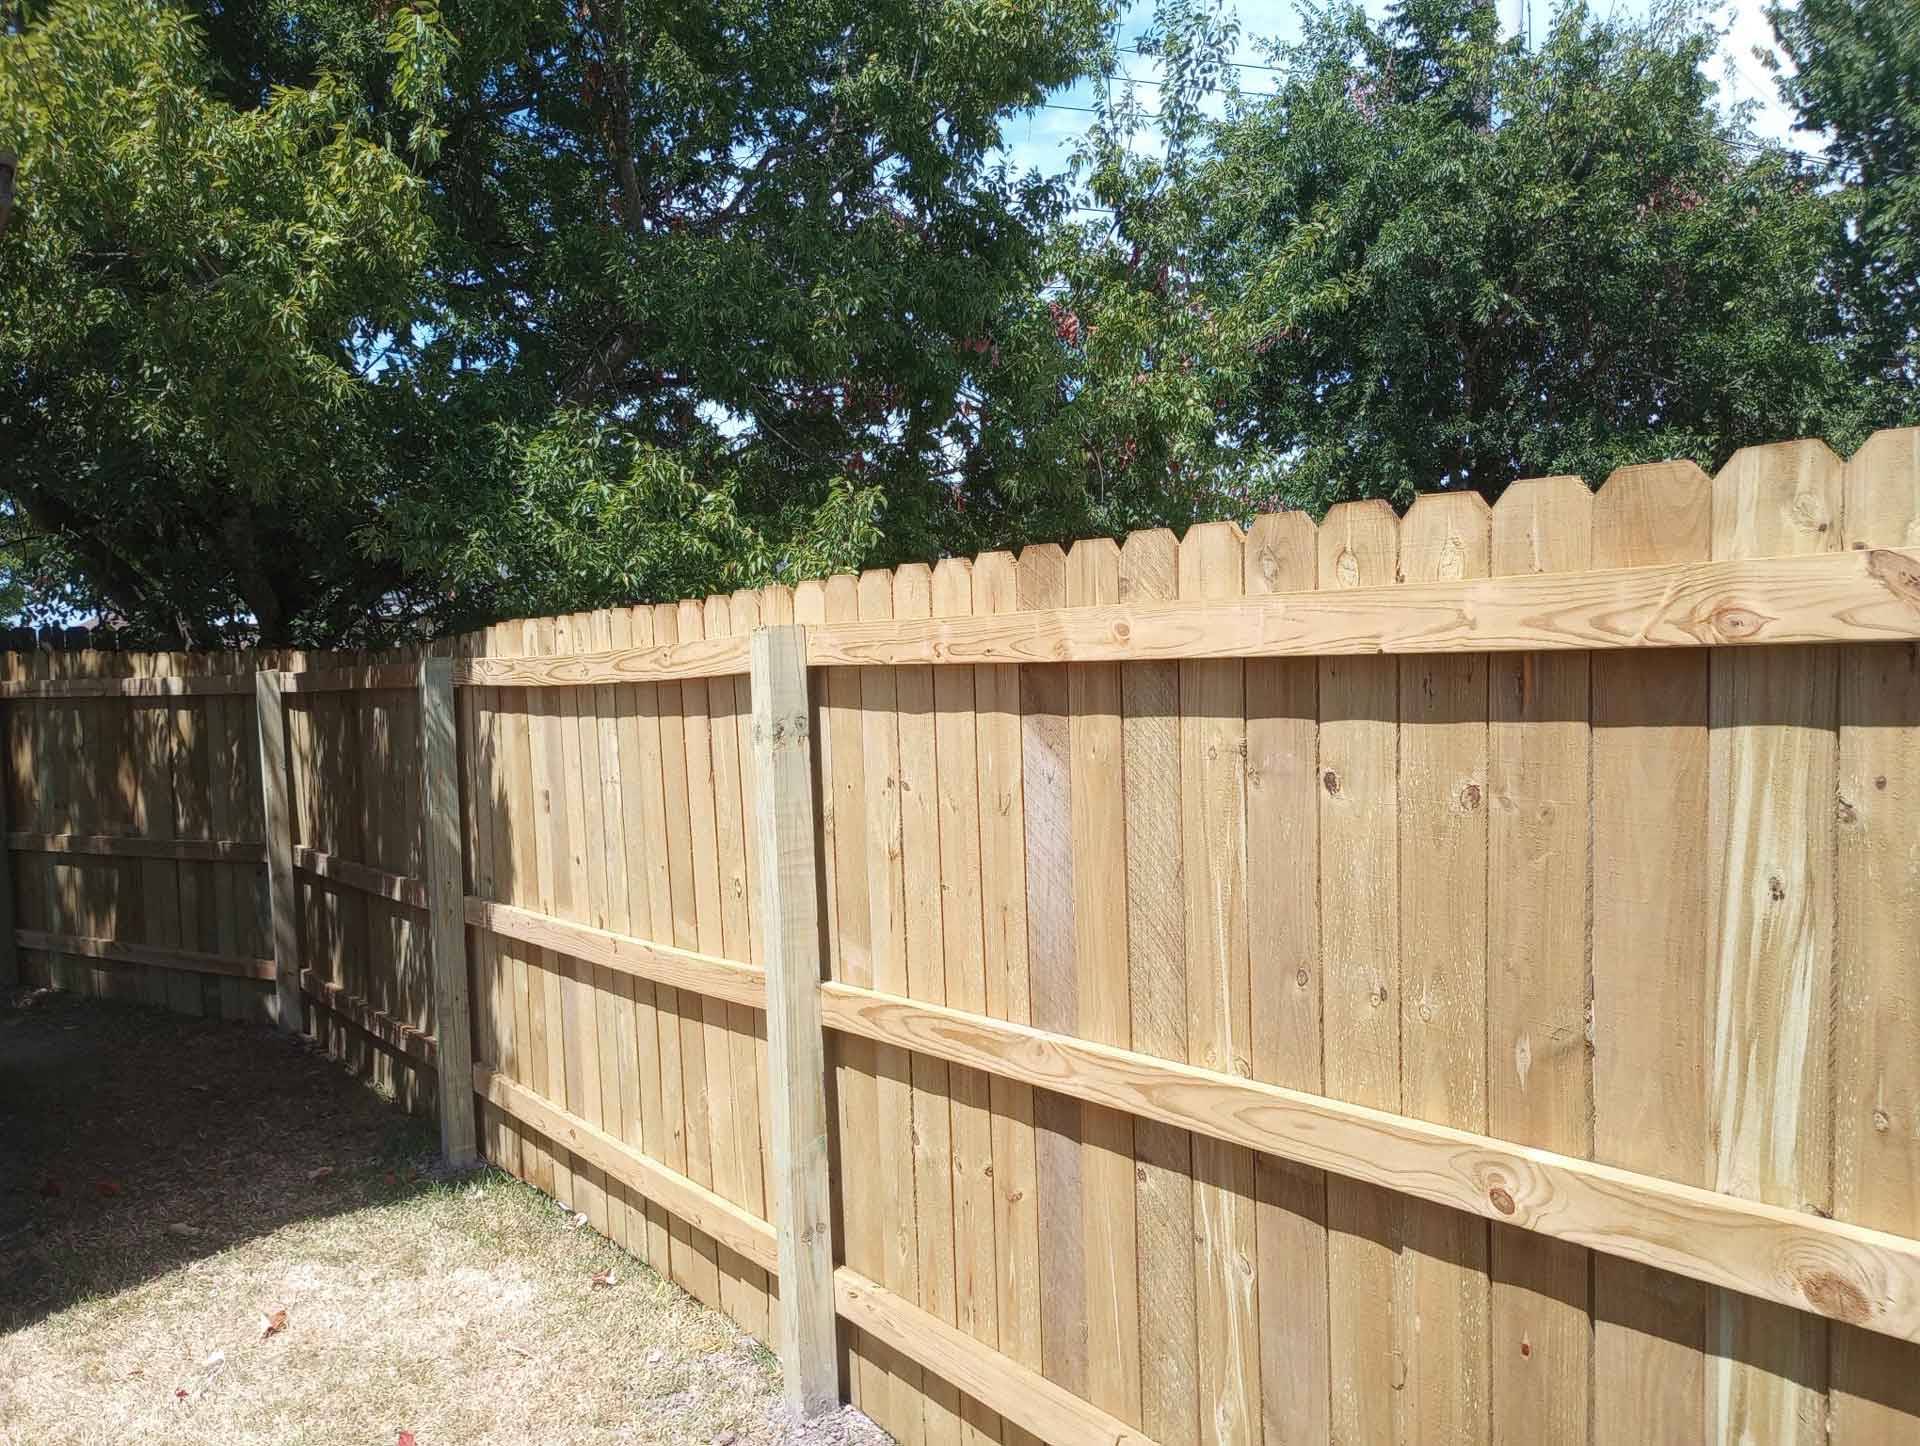 A wooden privacy fence